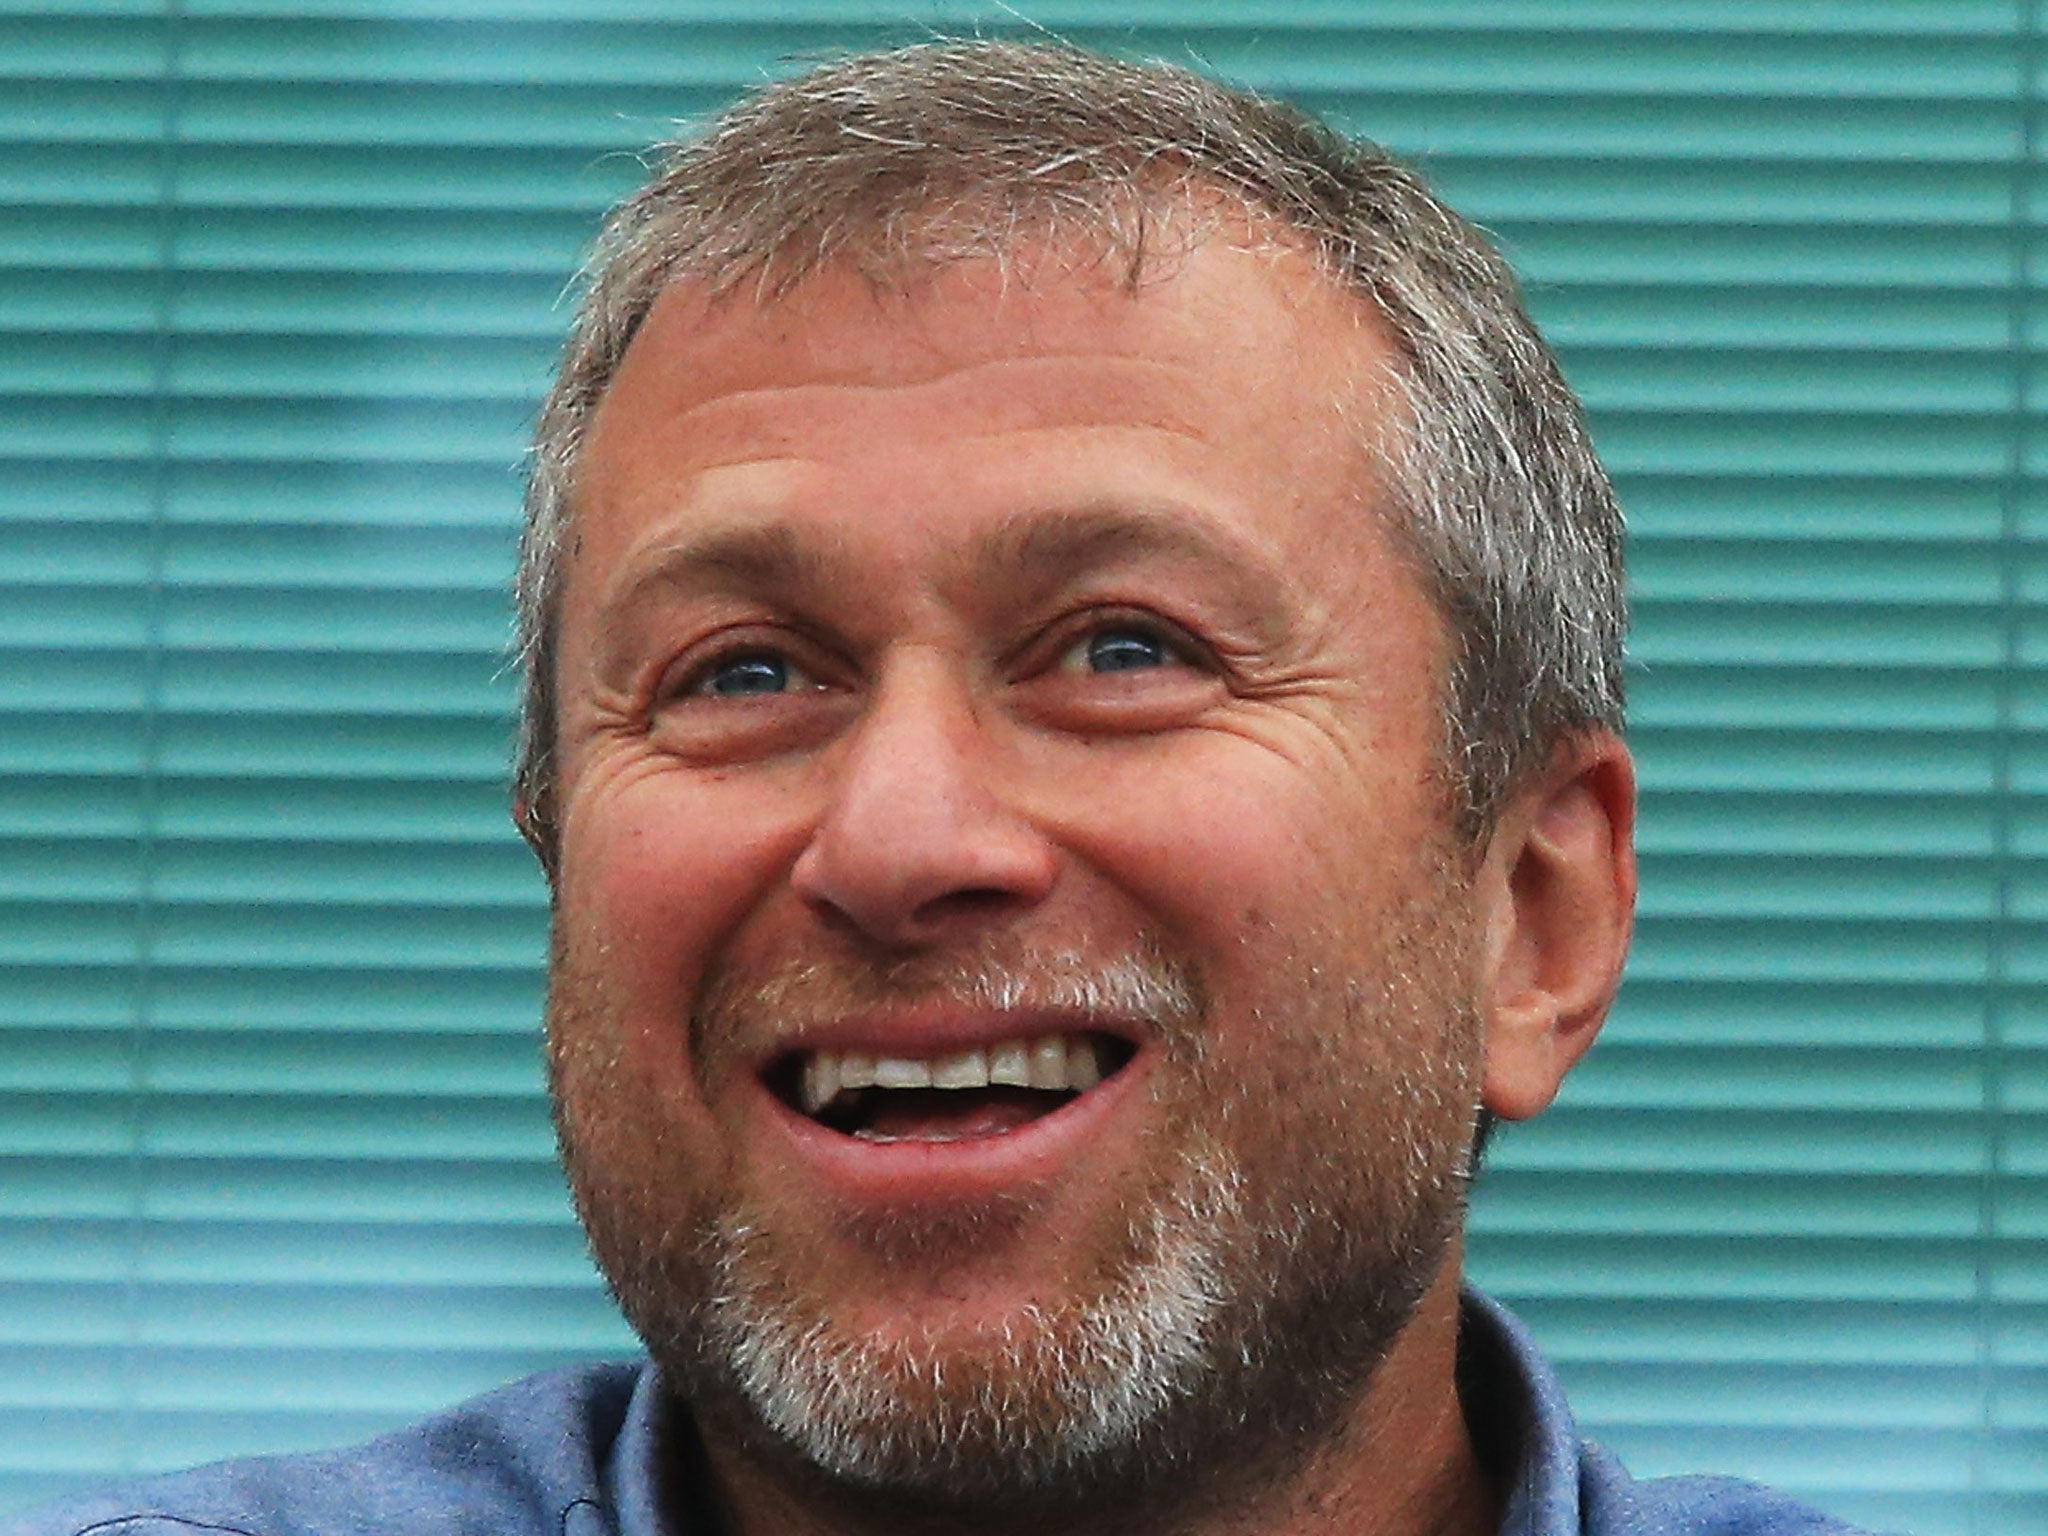 Roman Abramovich thanked all the supporters in a rare message